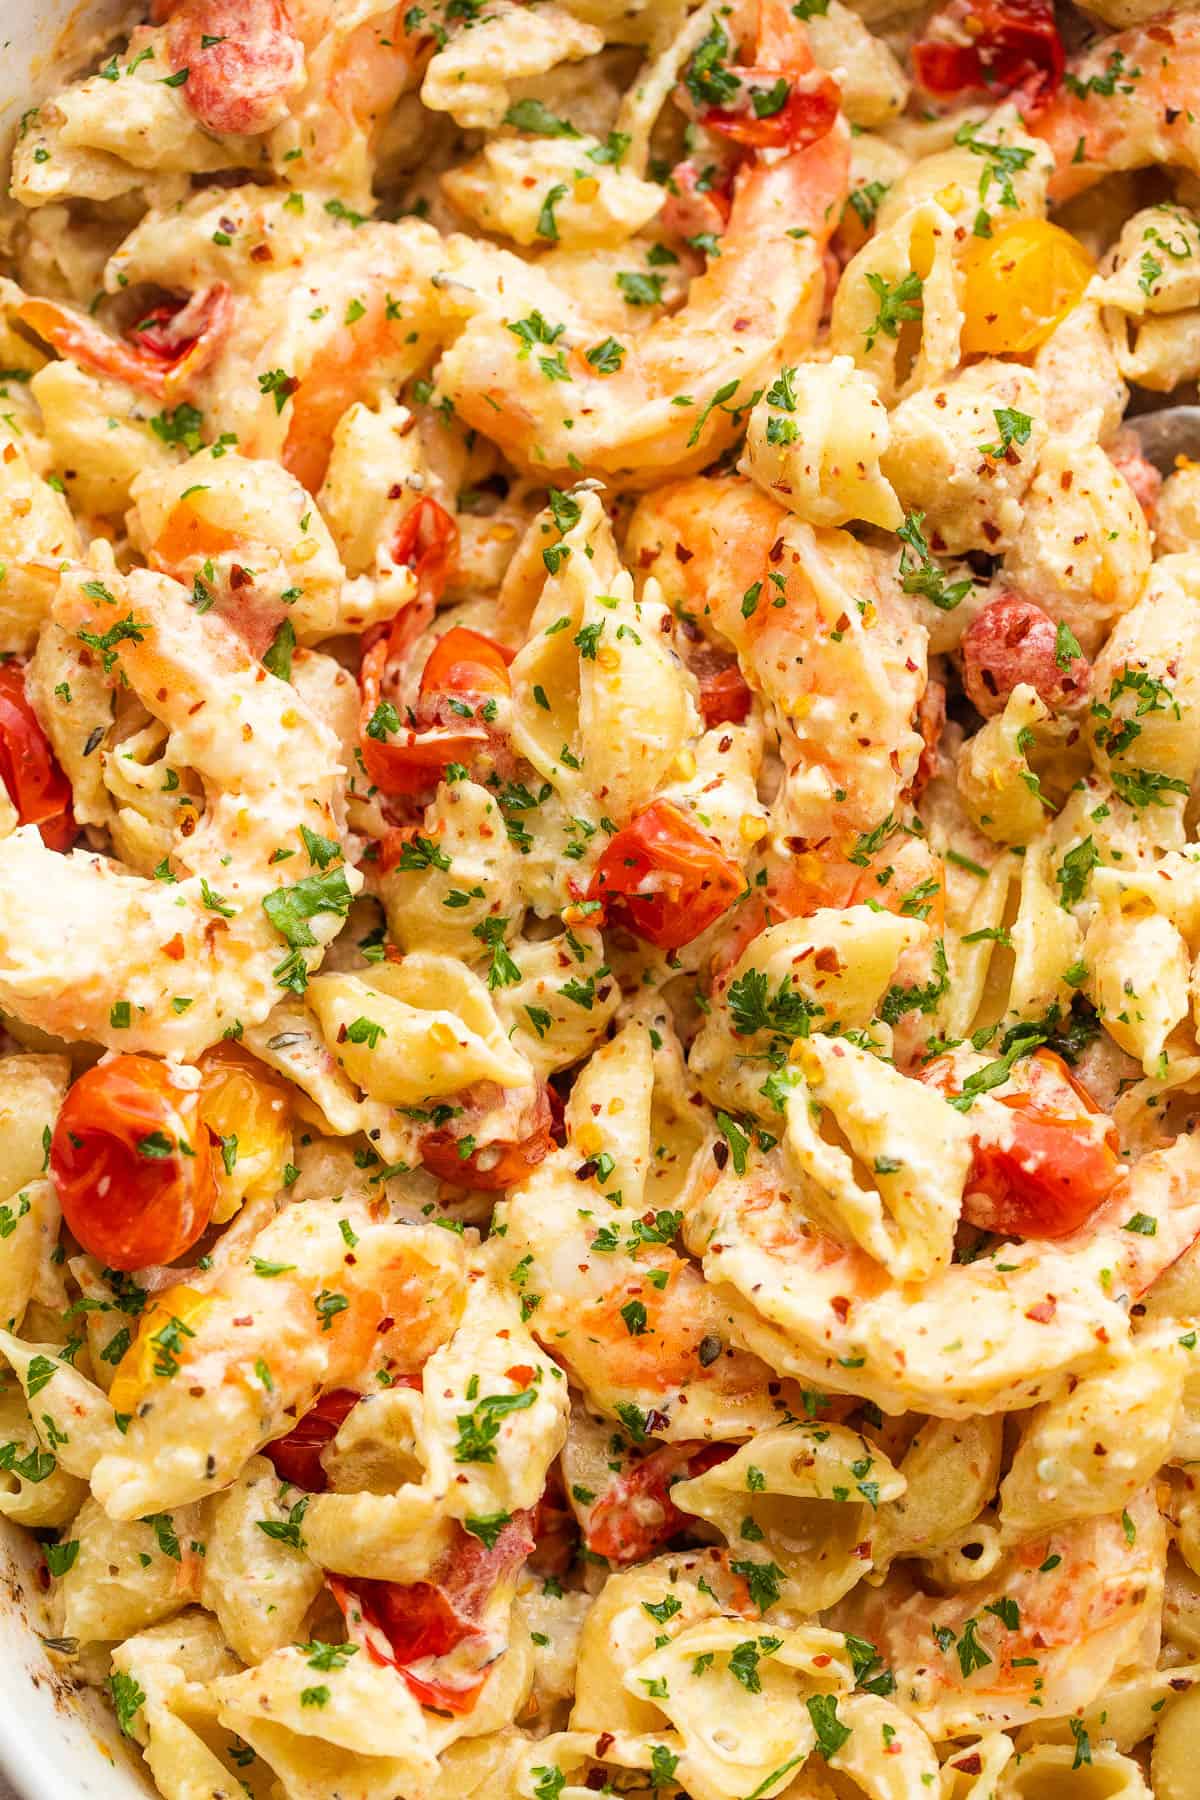 shrimp and pasta tossed with a cream cheese sauce and cherry tomatoes